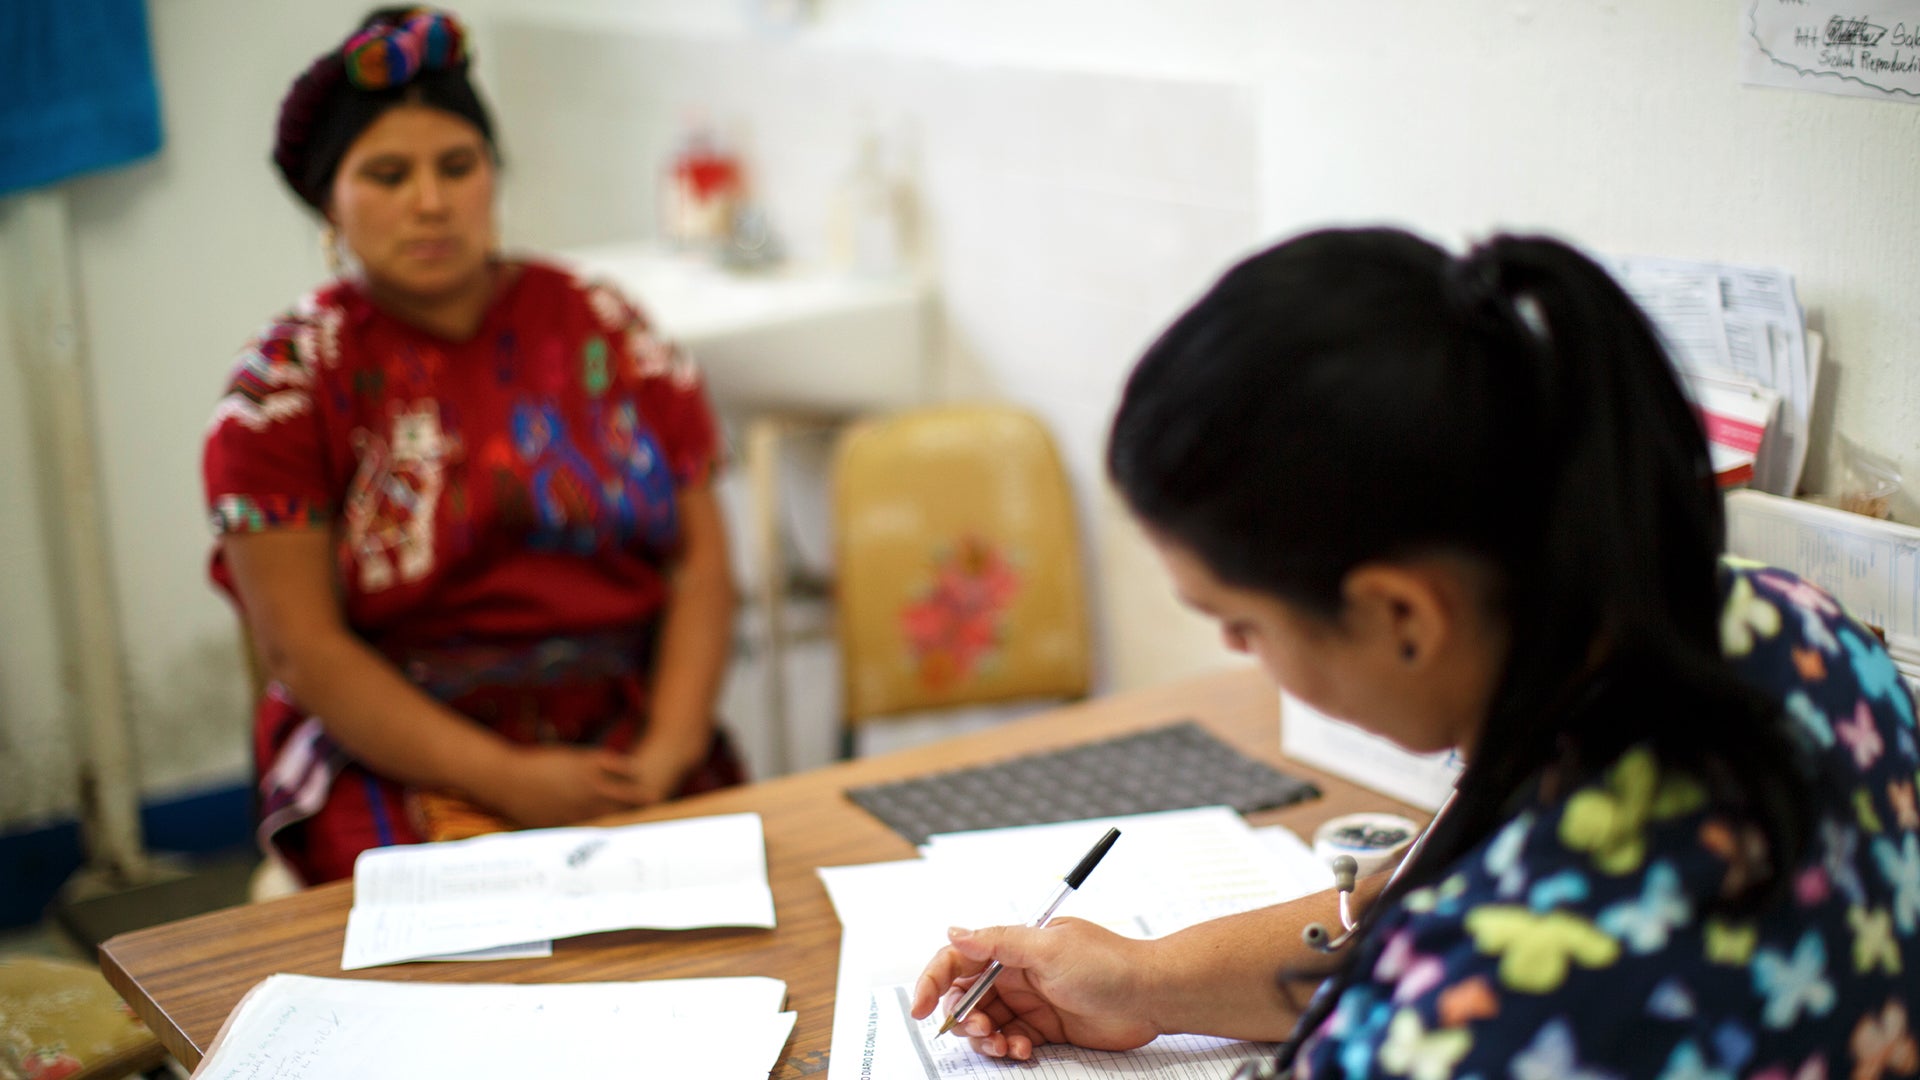 Indigenous woman received medical services